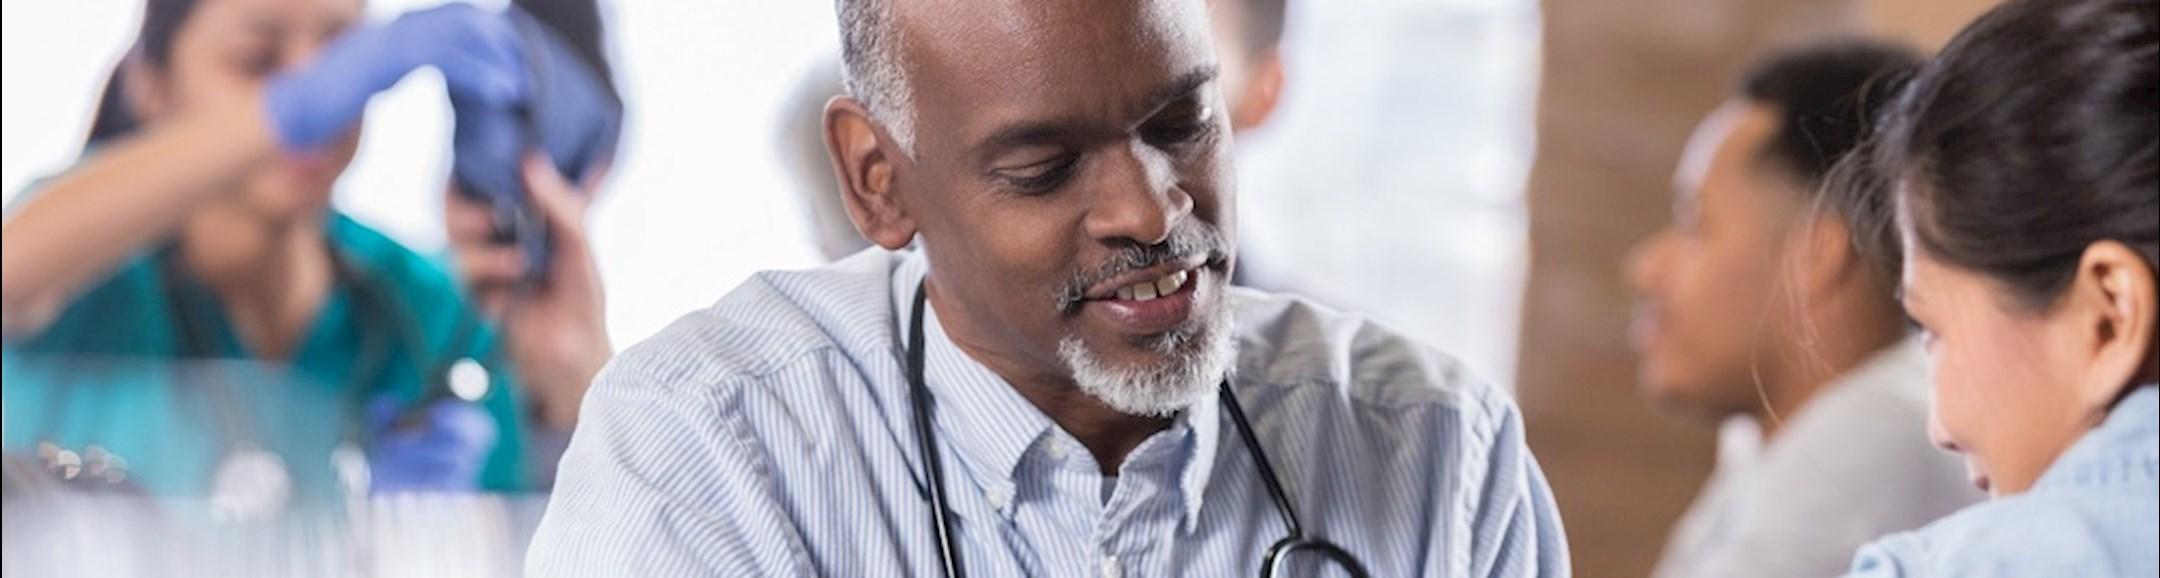 Top 5 questions to ask your doctor